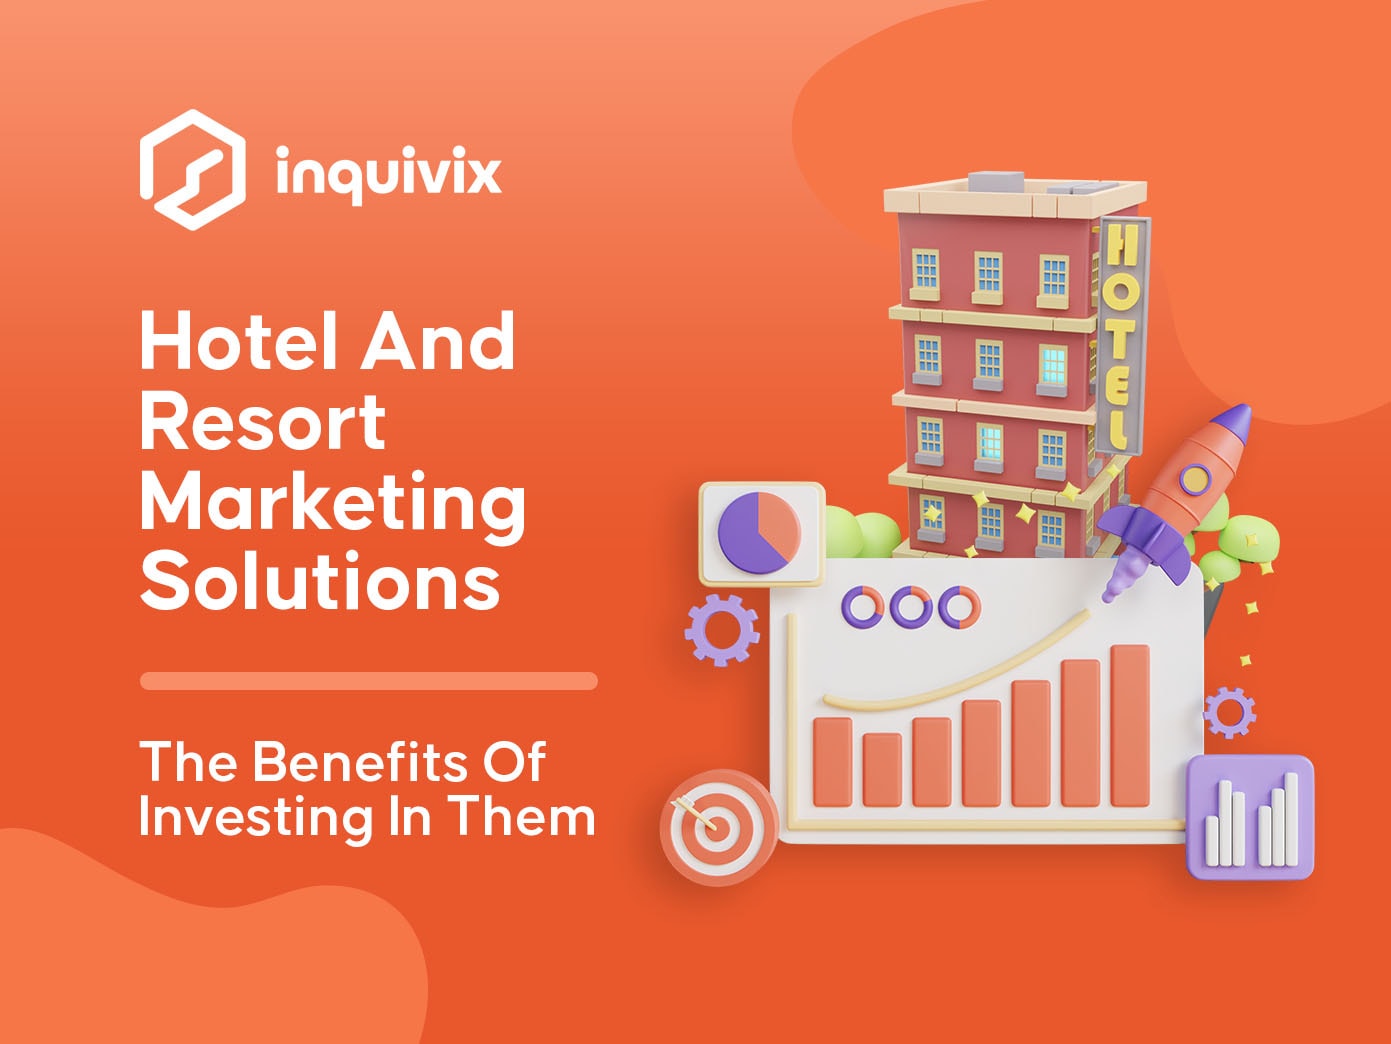 Hotel And Resort Marketing Solutions - The Benefits Of Investing In Them | INQUIVIX